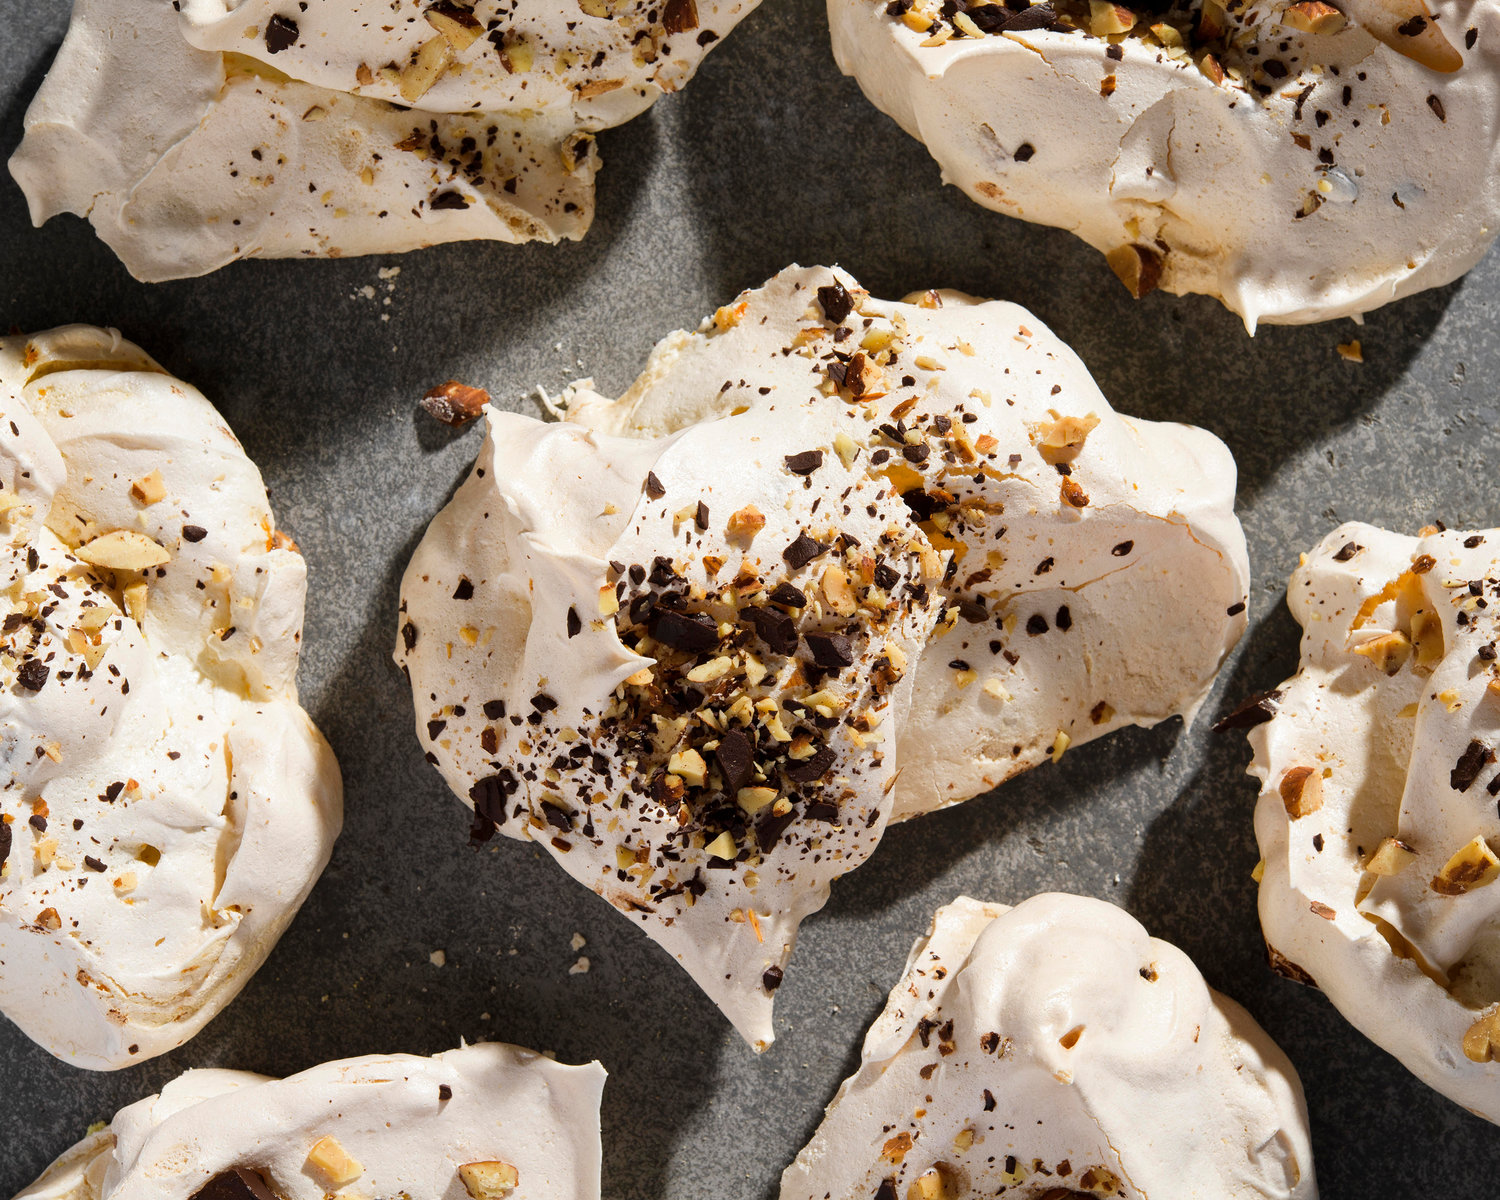 A recipe for meringue cookies topped with salted peanuts and chocolate.